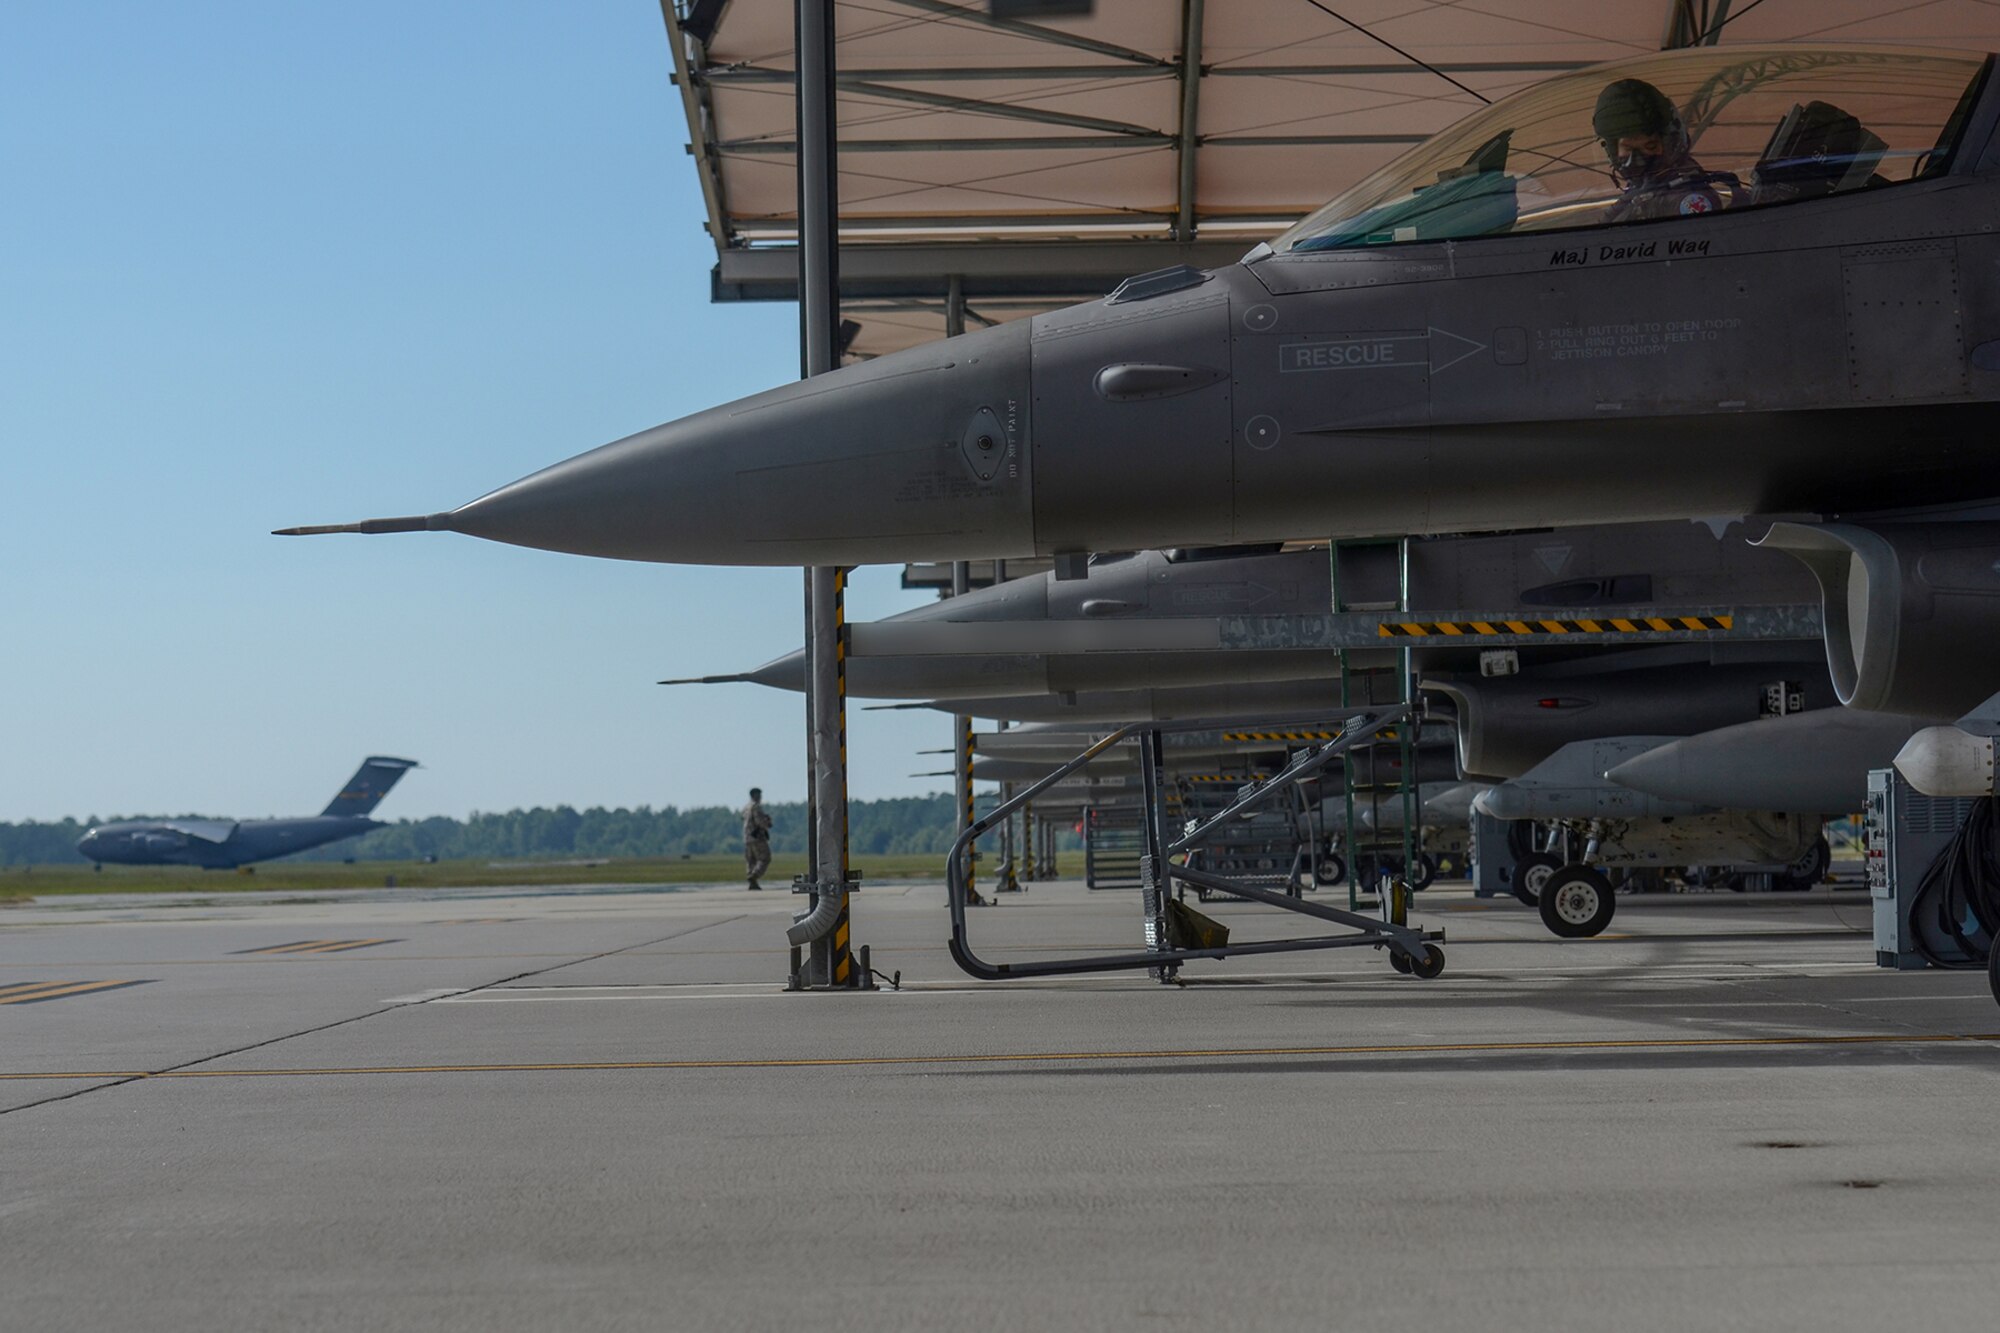 U.S. Air Force Capt. Mark Fattman, an F-16 fighter pilot assigned to the 169th Fighter Wing, South Carolina Air National Guard, performs a pre-flight inspection at Mc McEntire Joint National Guard Base, S.C., July 11, 2016. Approximately 300 U.S. Airmen and 12 F-16 Fighting Falcon jets from the 169th Fighter Wing at McEntire JNGB, S.C., are deploying to Osan Air Base, Republic of Korea, as the 157th Expeditionary Fighter Squadron in support of the U.S. Pacific Command Theater Security Package. (U.S. Air National Guard photo by Airman 1st Class Megan Floyd)